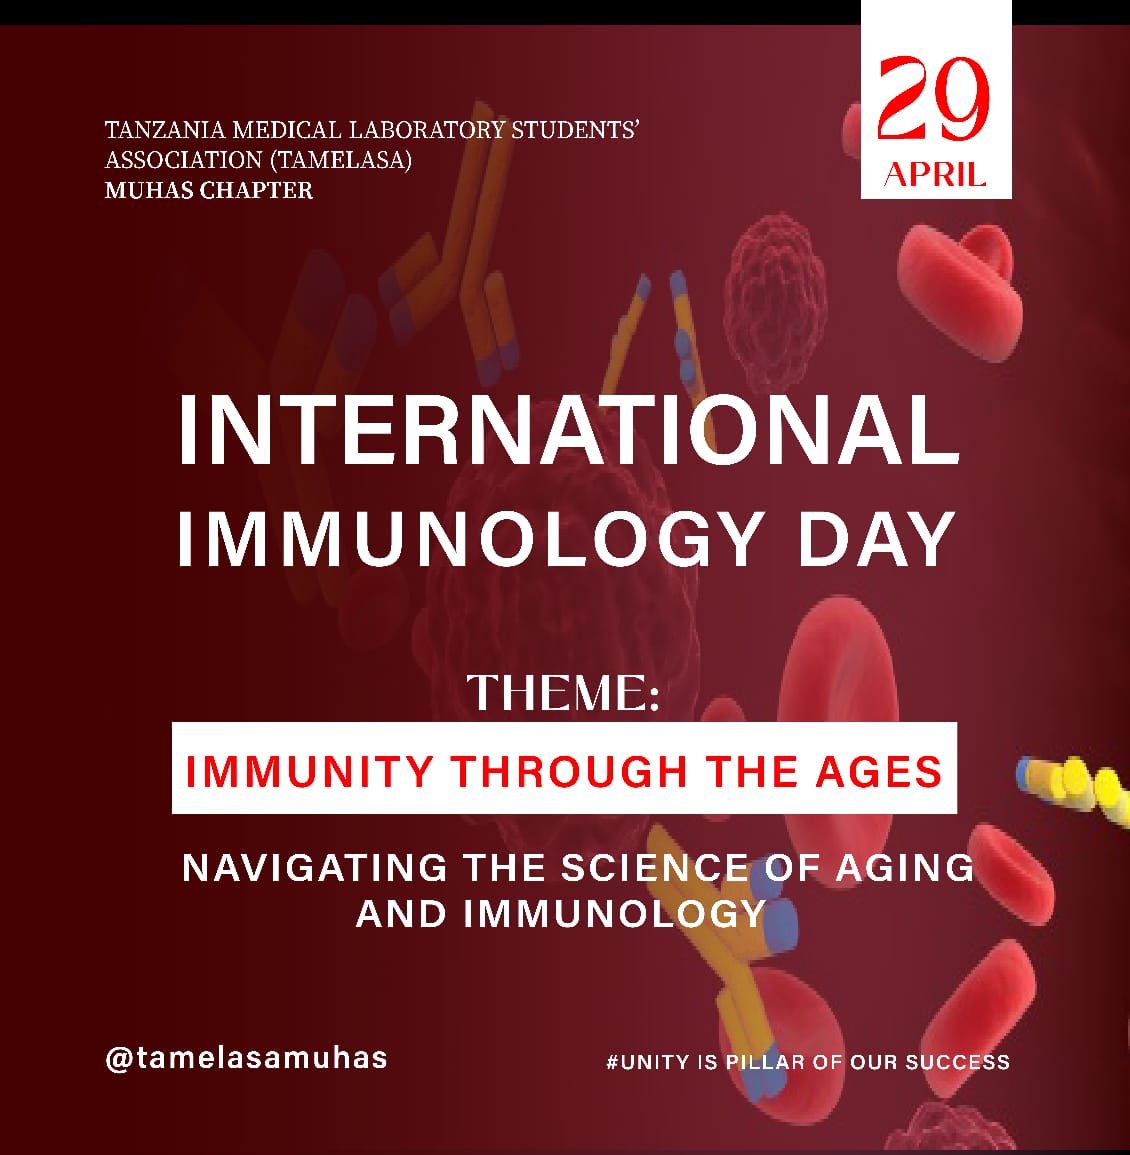 Happy Immunology day from TAMELASA🧫 In this day, we celebrate the remarkable power of our immune systems in fighting infection and disease, focusing on how aging impacts immunity and its implications for vaccine development and medical interventions across all age groups.